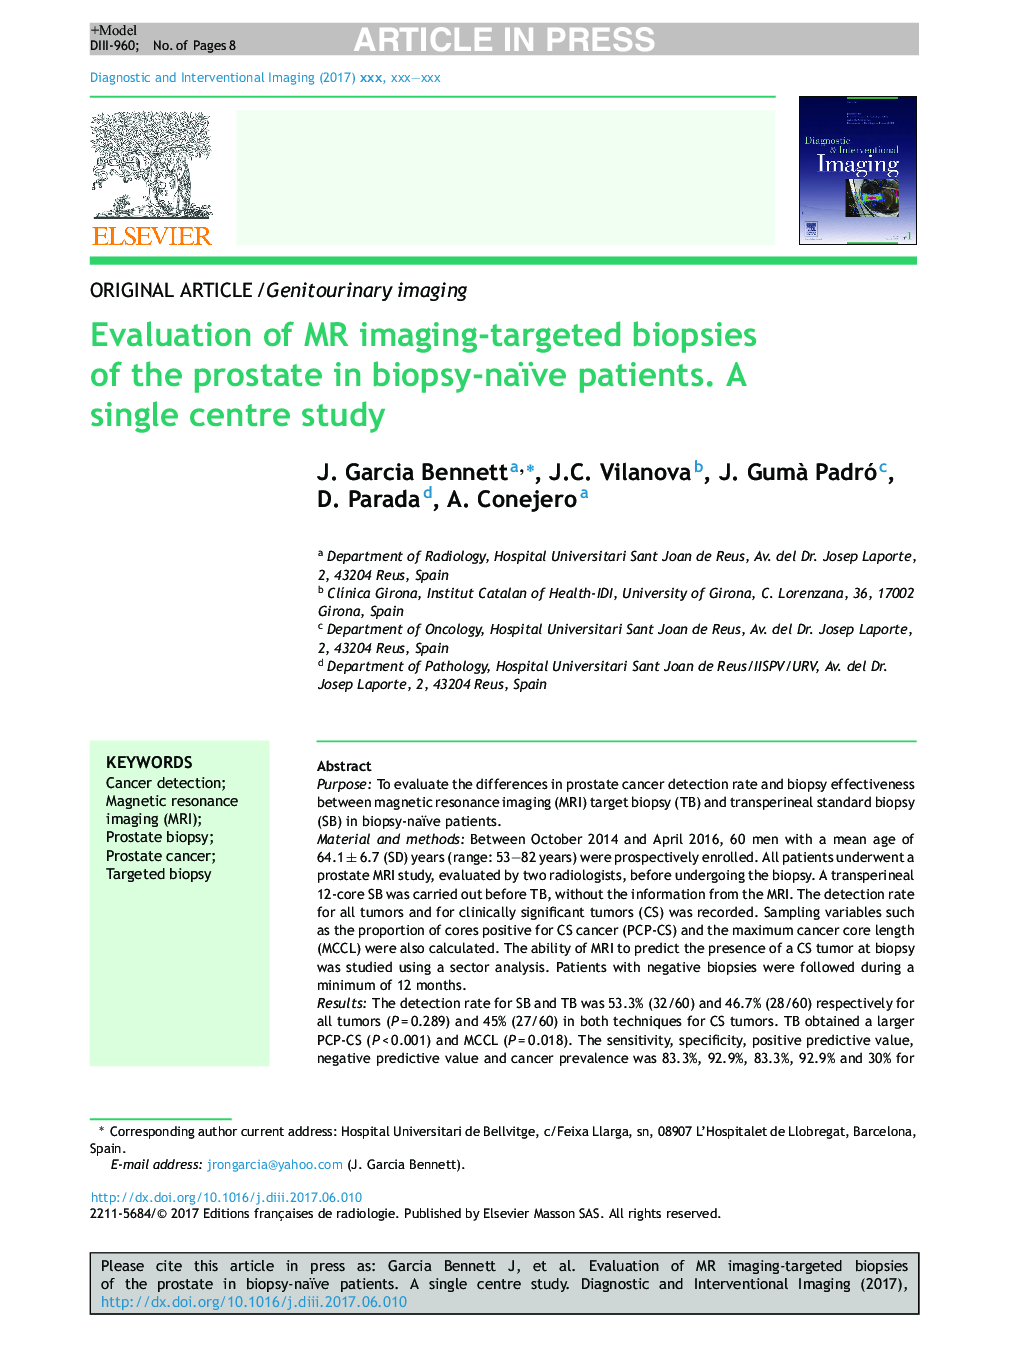 Evaluation of MR imaging-targeted biopsies of the prostate in biopsy-naïve patients. A single centre study